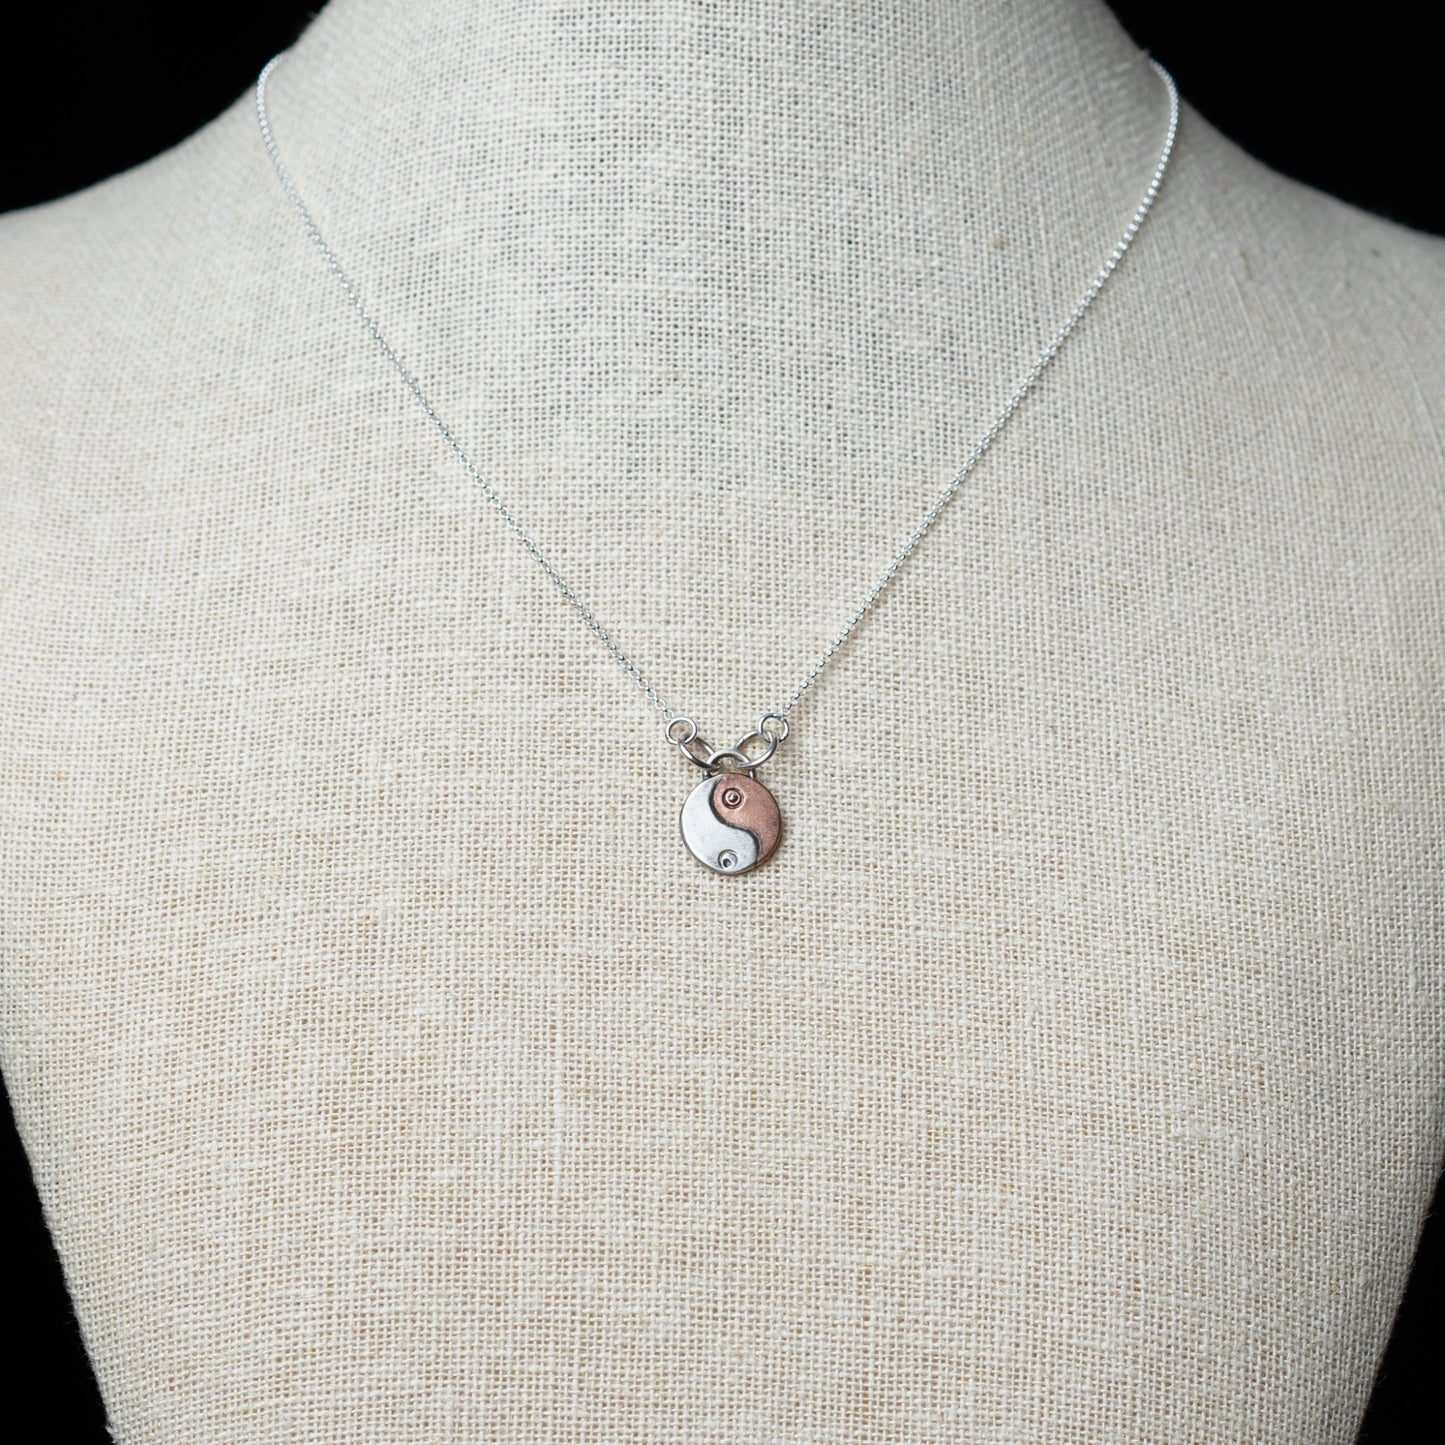 Silver & Copper Ying Yang Necklace